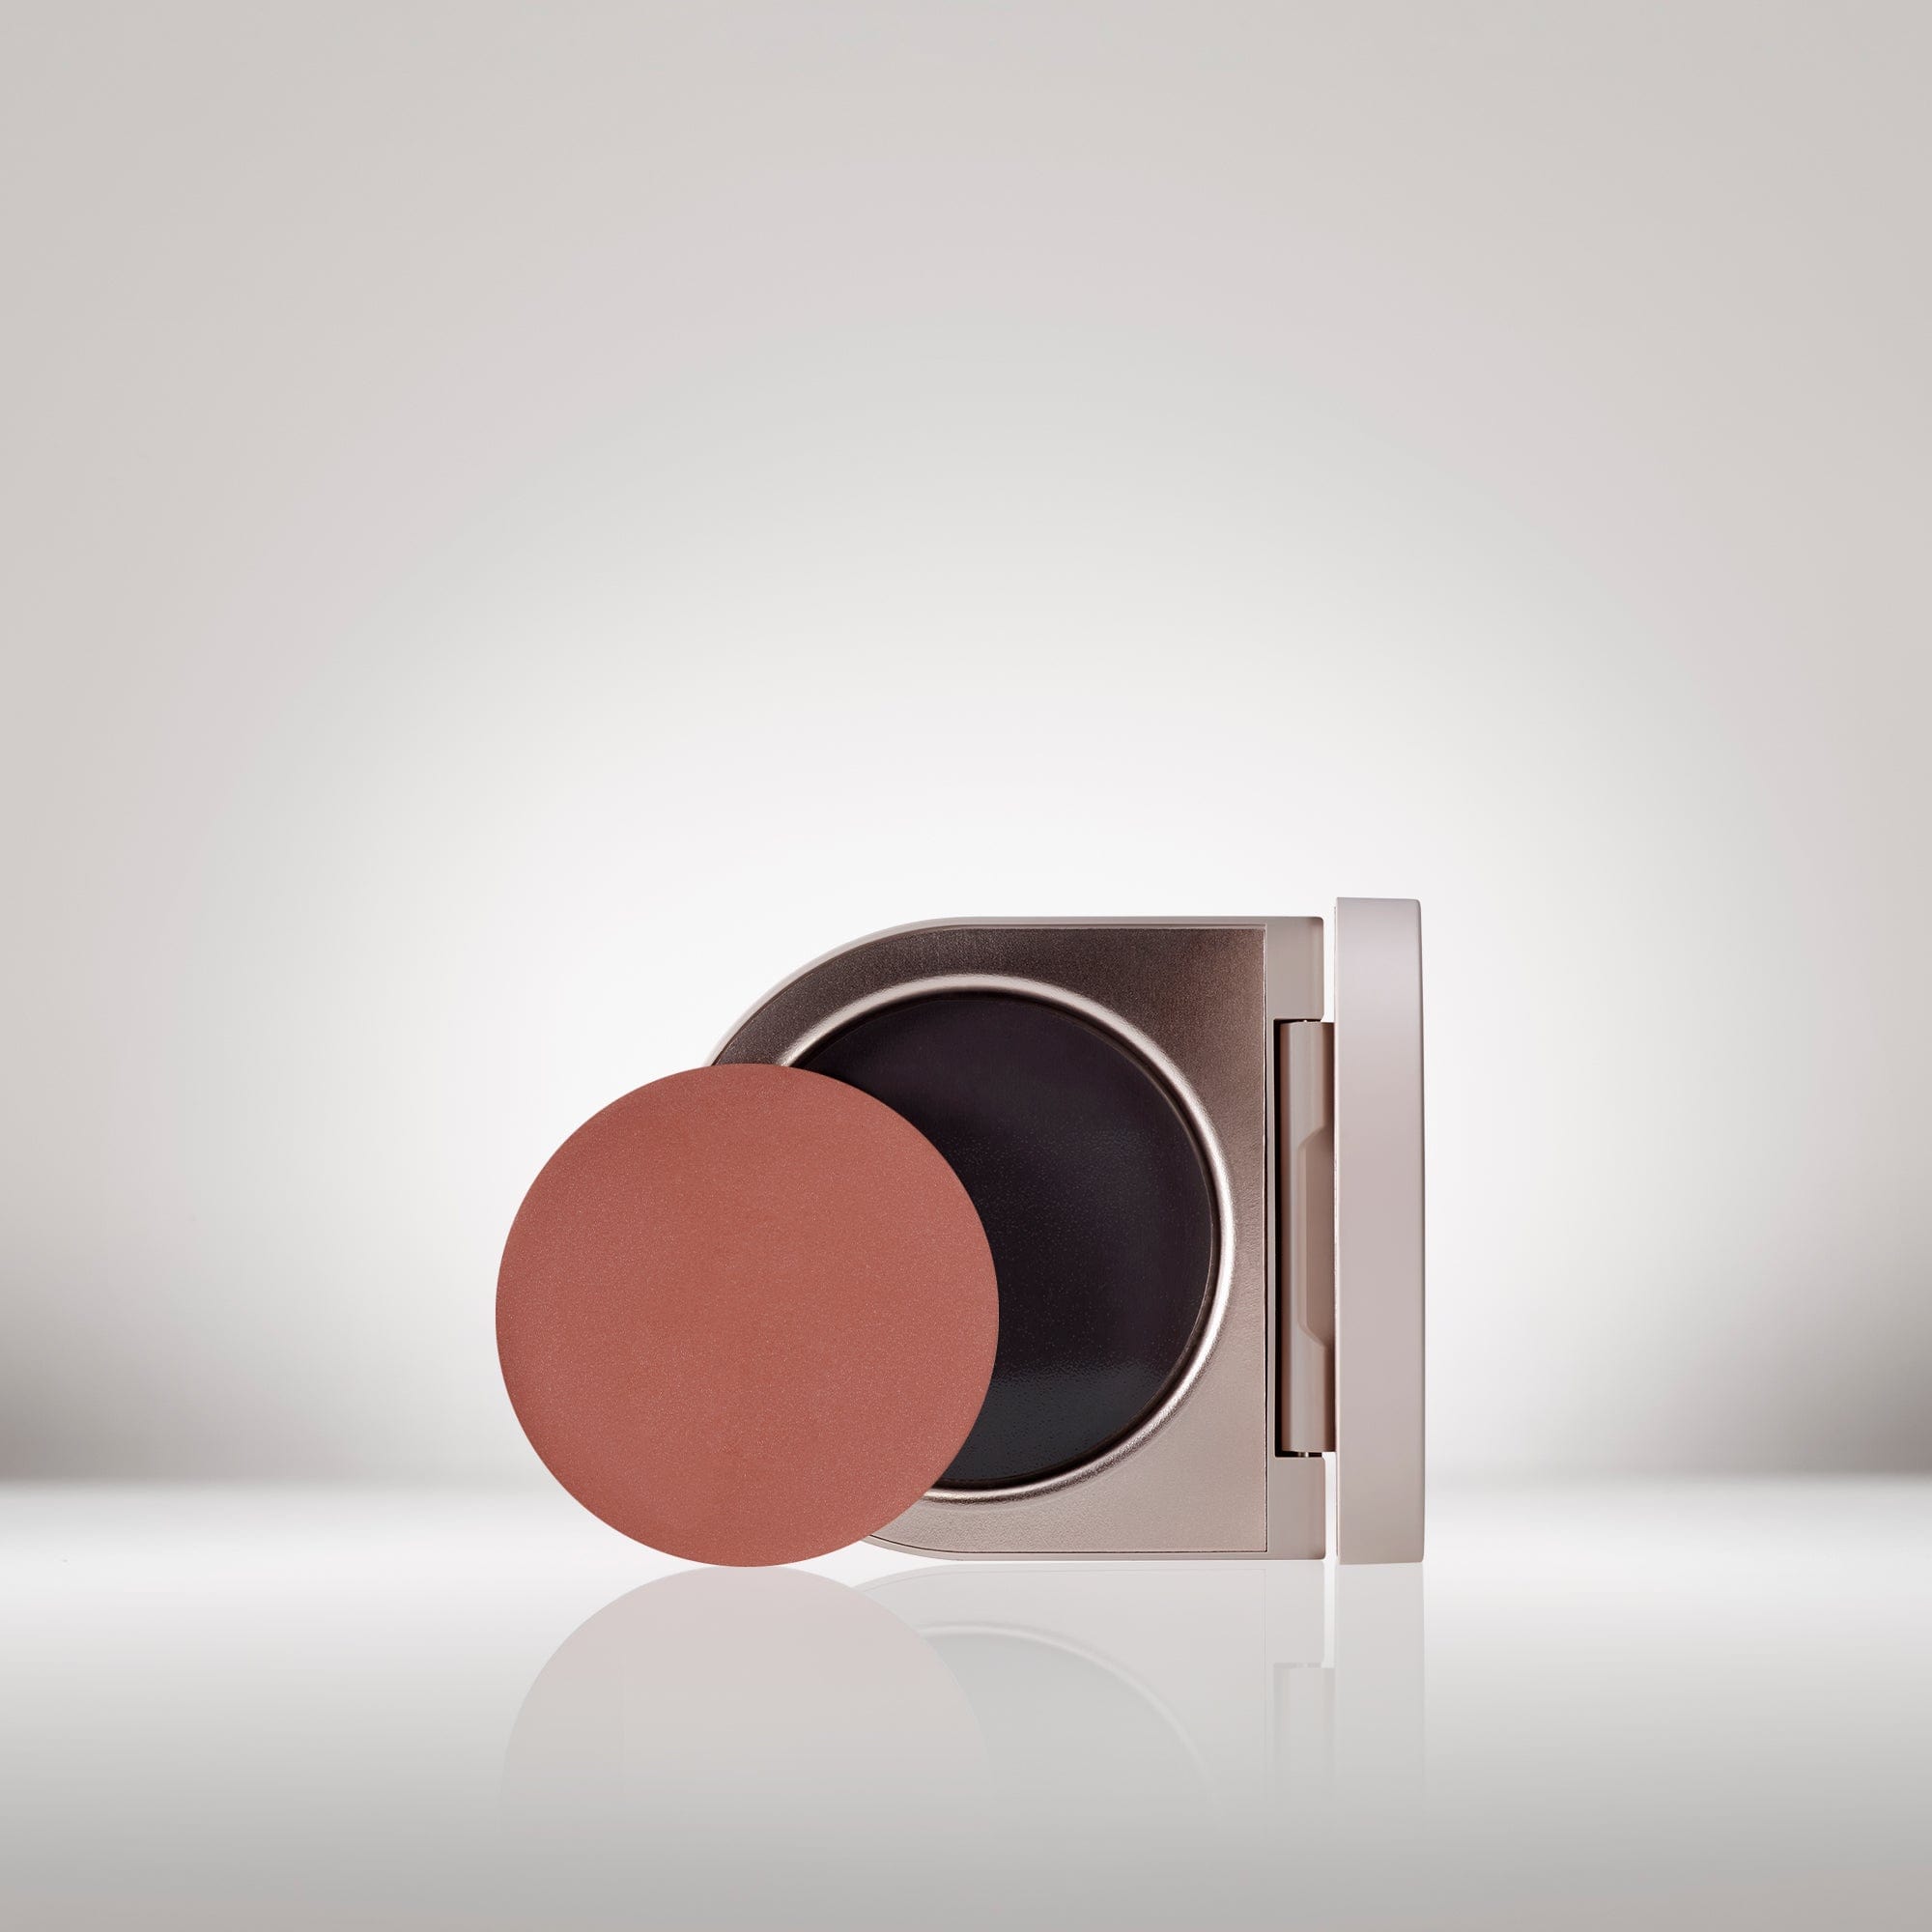 Image of the Cream Blush Refillable Cheek & Lip Color in Heliotrope in front of the open compact - Cream blush